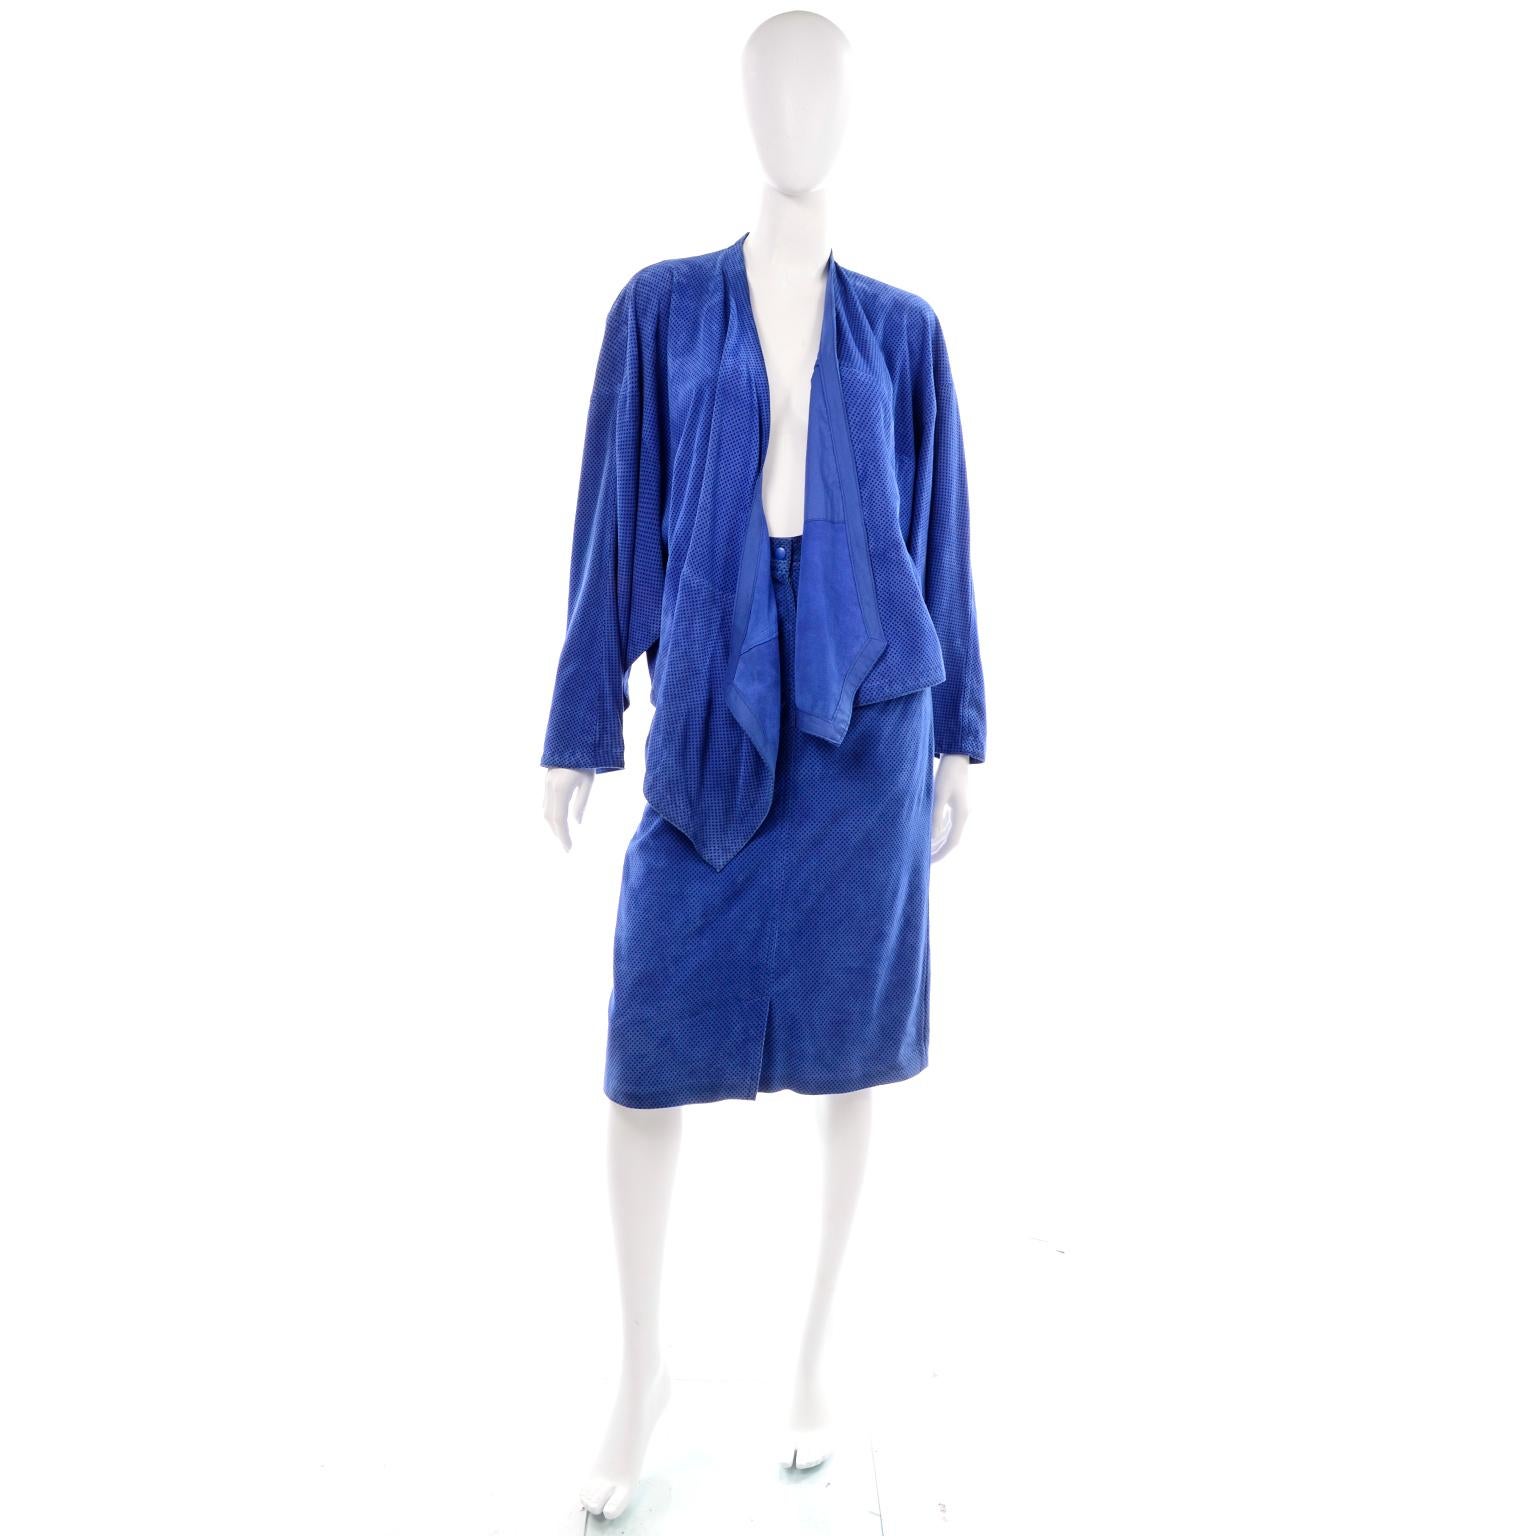 Escada 1980's Blue Suede Asymmetrical Jacket W/ Slits & Skirt  by Margartha Ley In Excellent Condition For Sale In Portland, OR